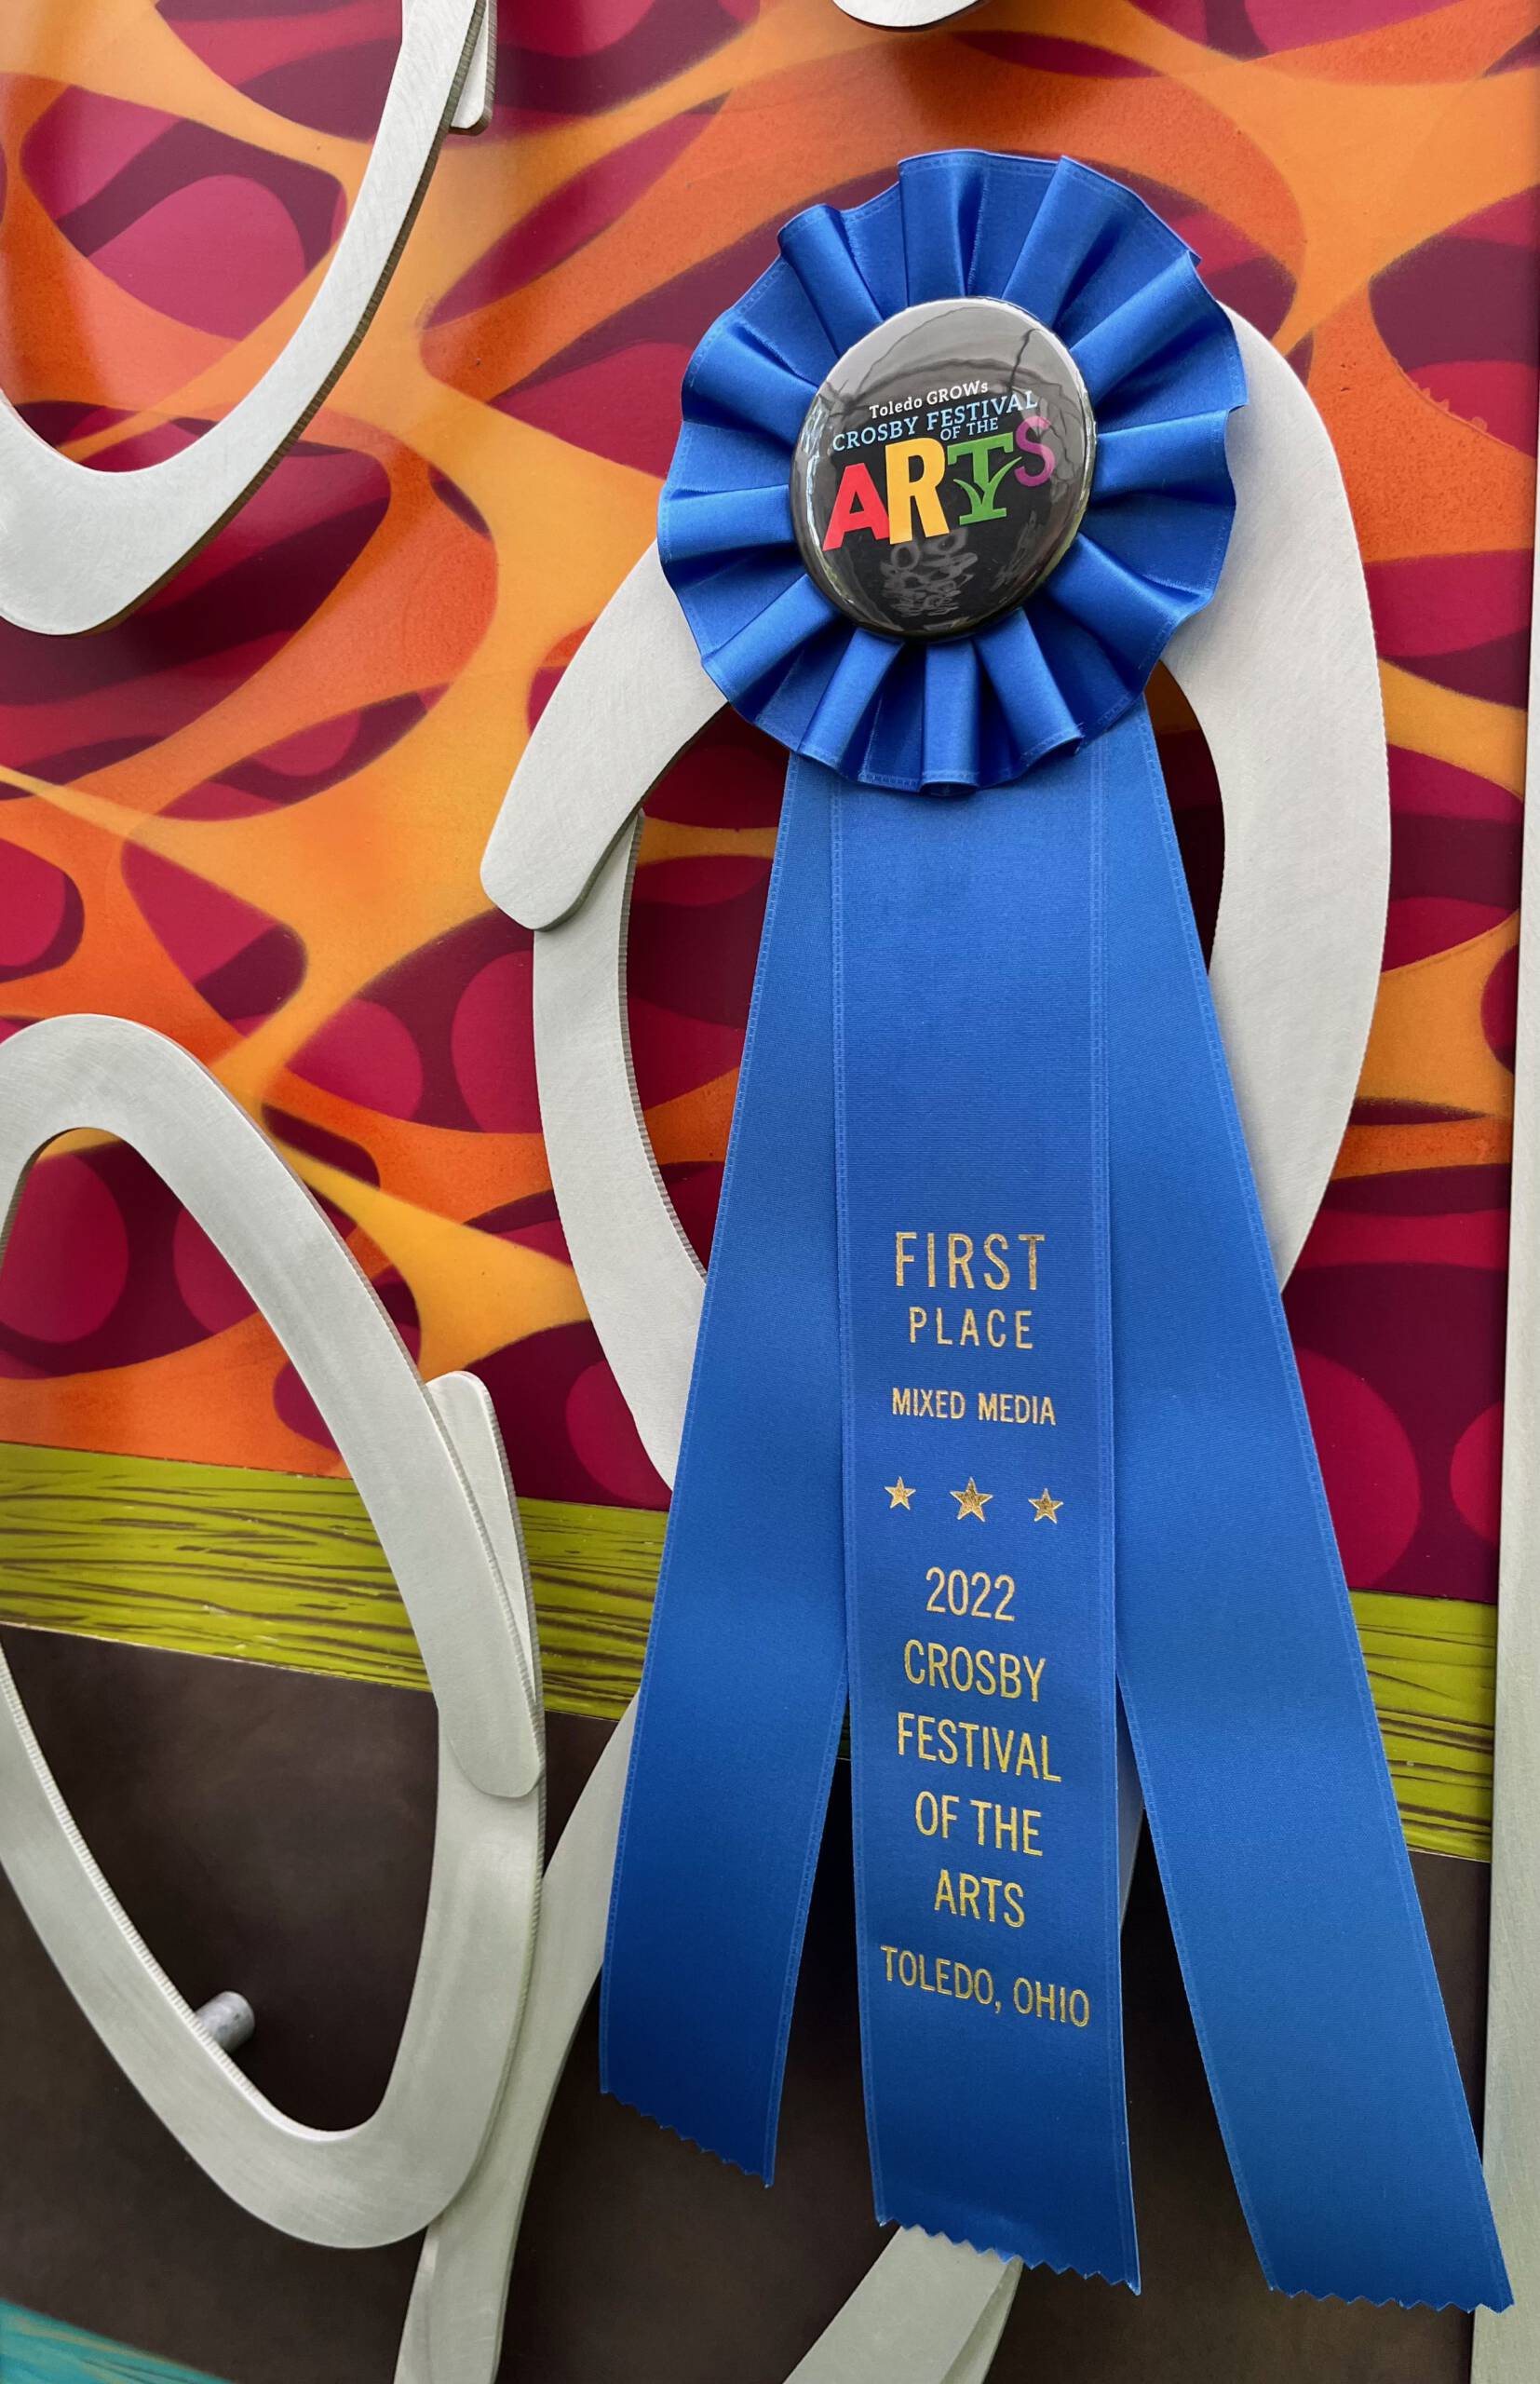 Crosby Festival of the Arts Best of Category Award News and Updates